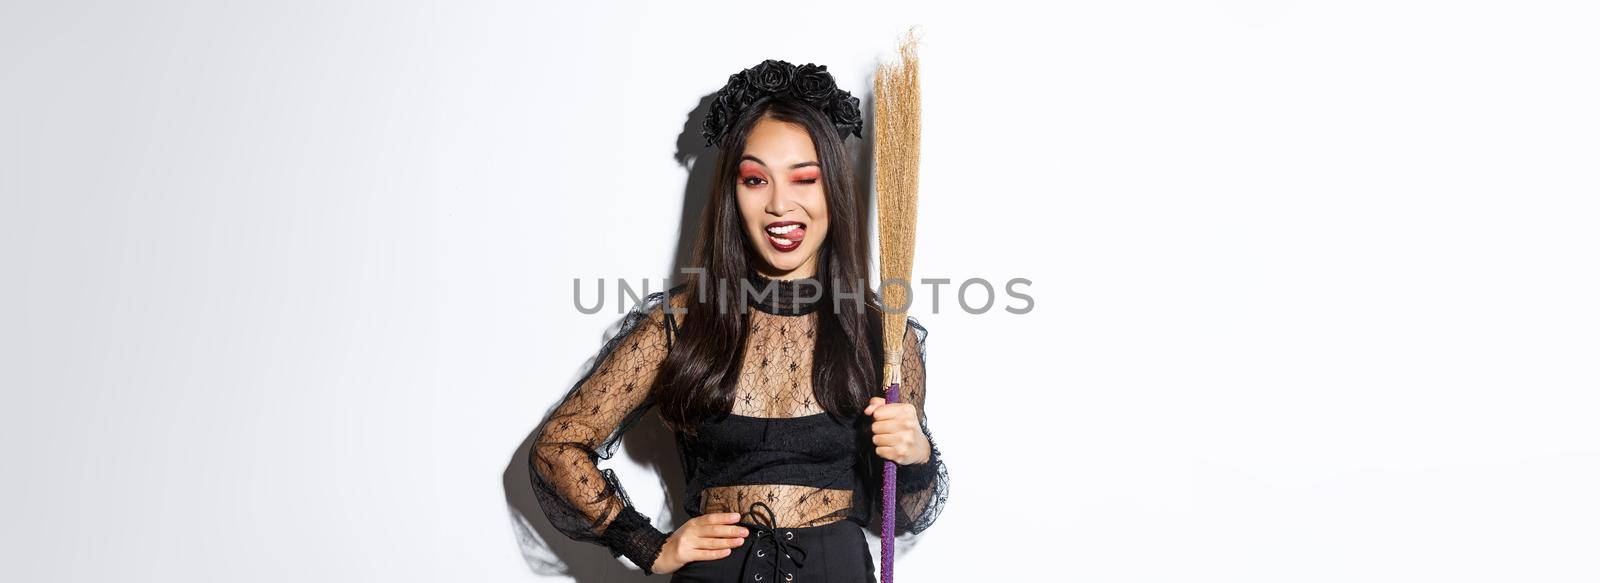 Sassy good-looking asian woman in witch costume showing tongue, holding broom and posing over white background.